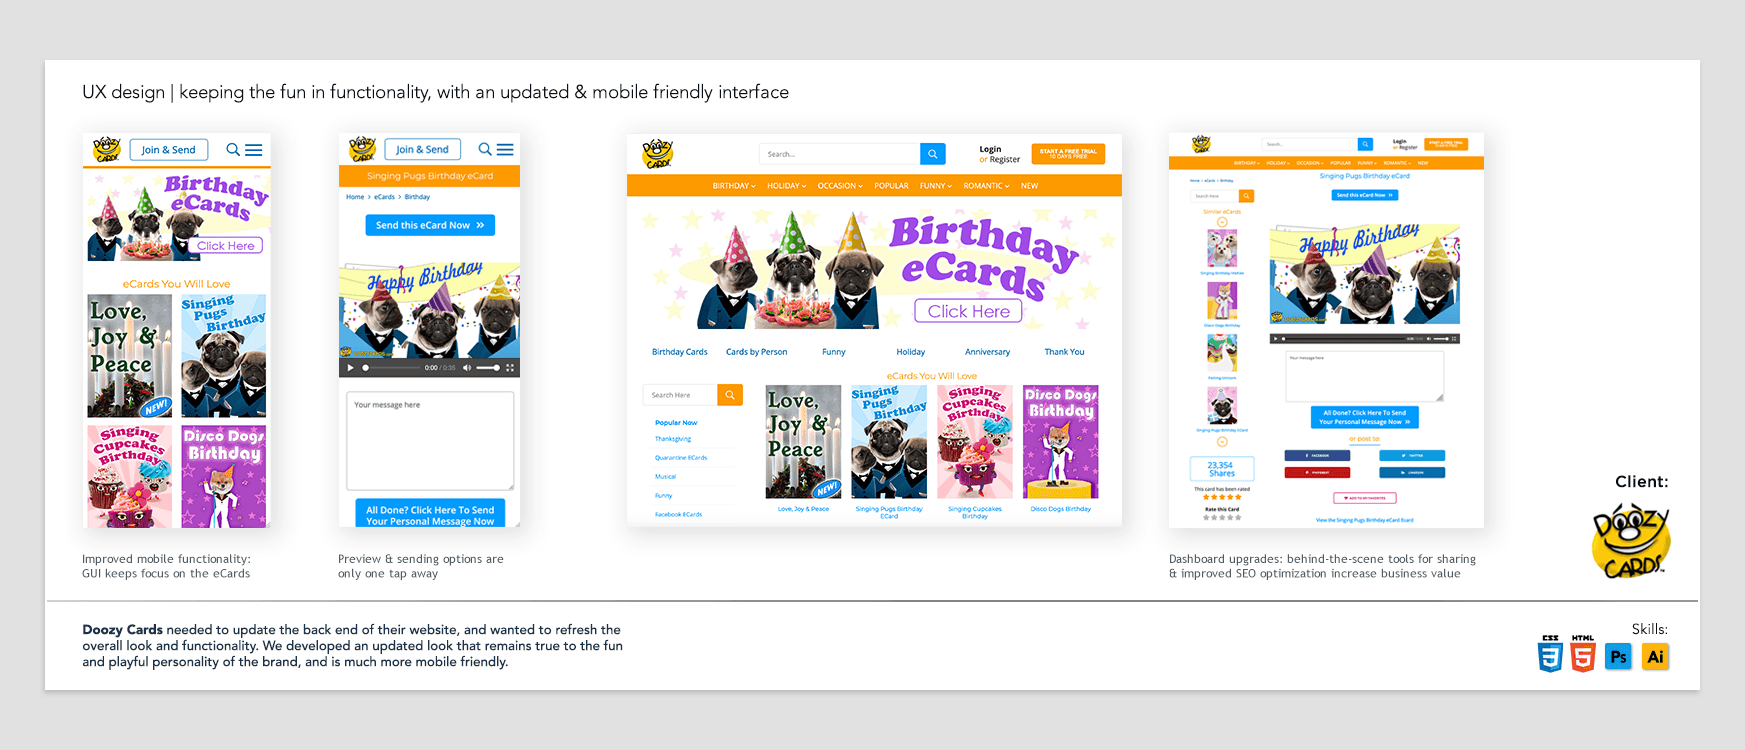 Mobile-friendly Redesign for Doozy Cards